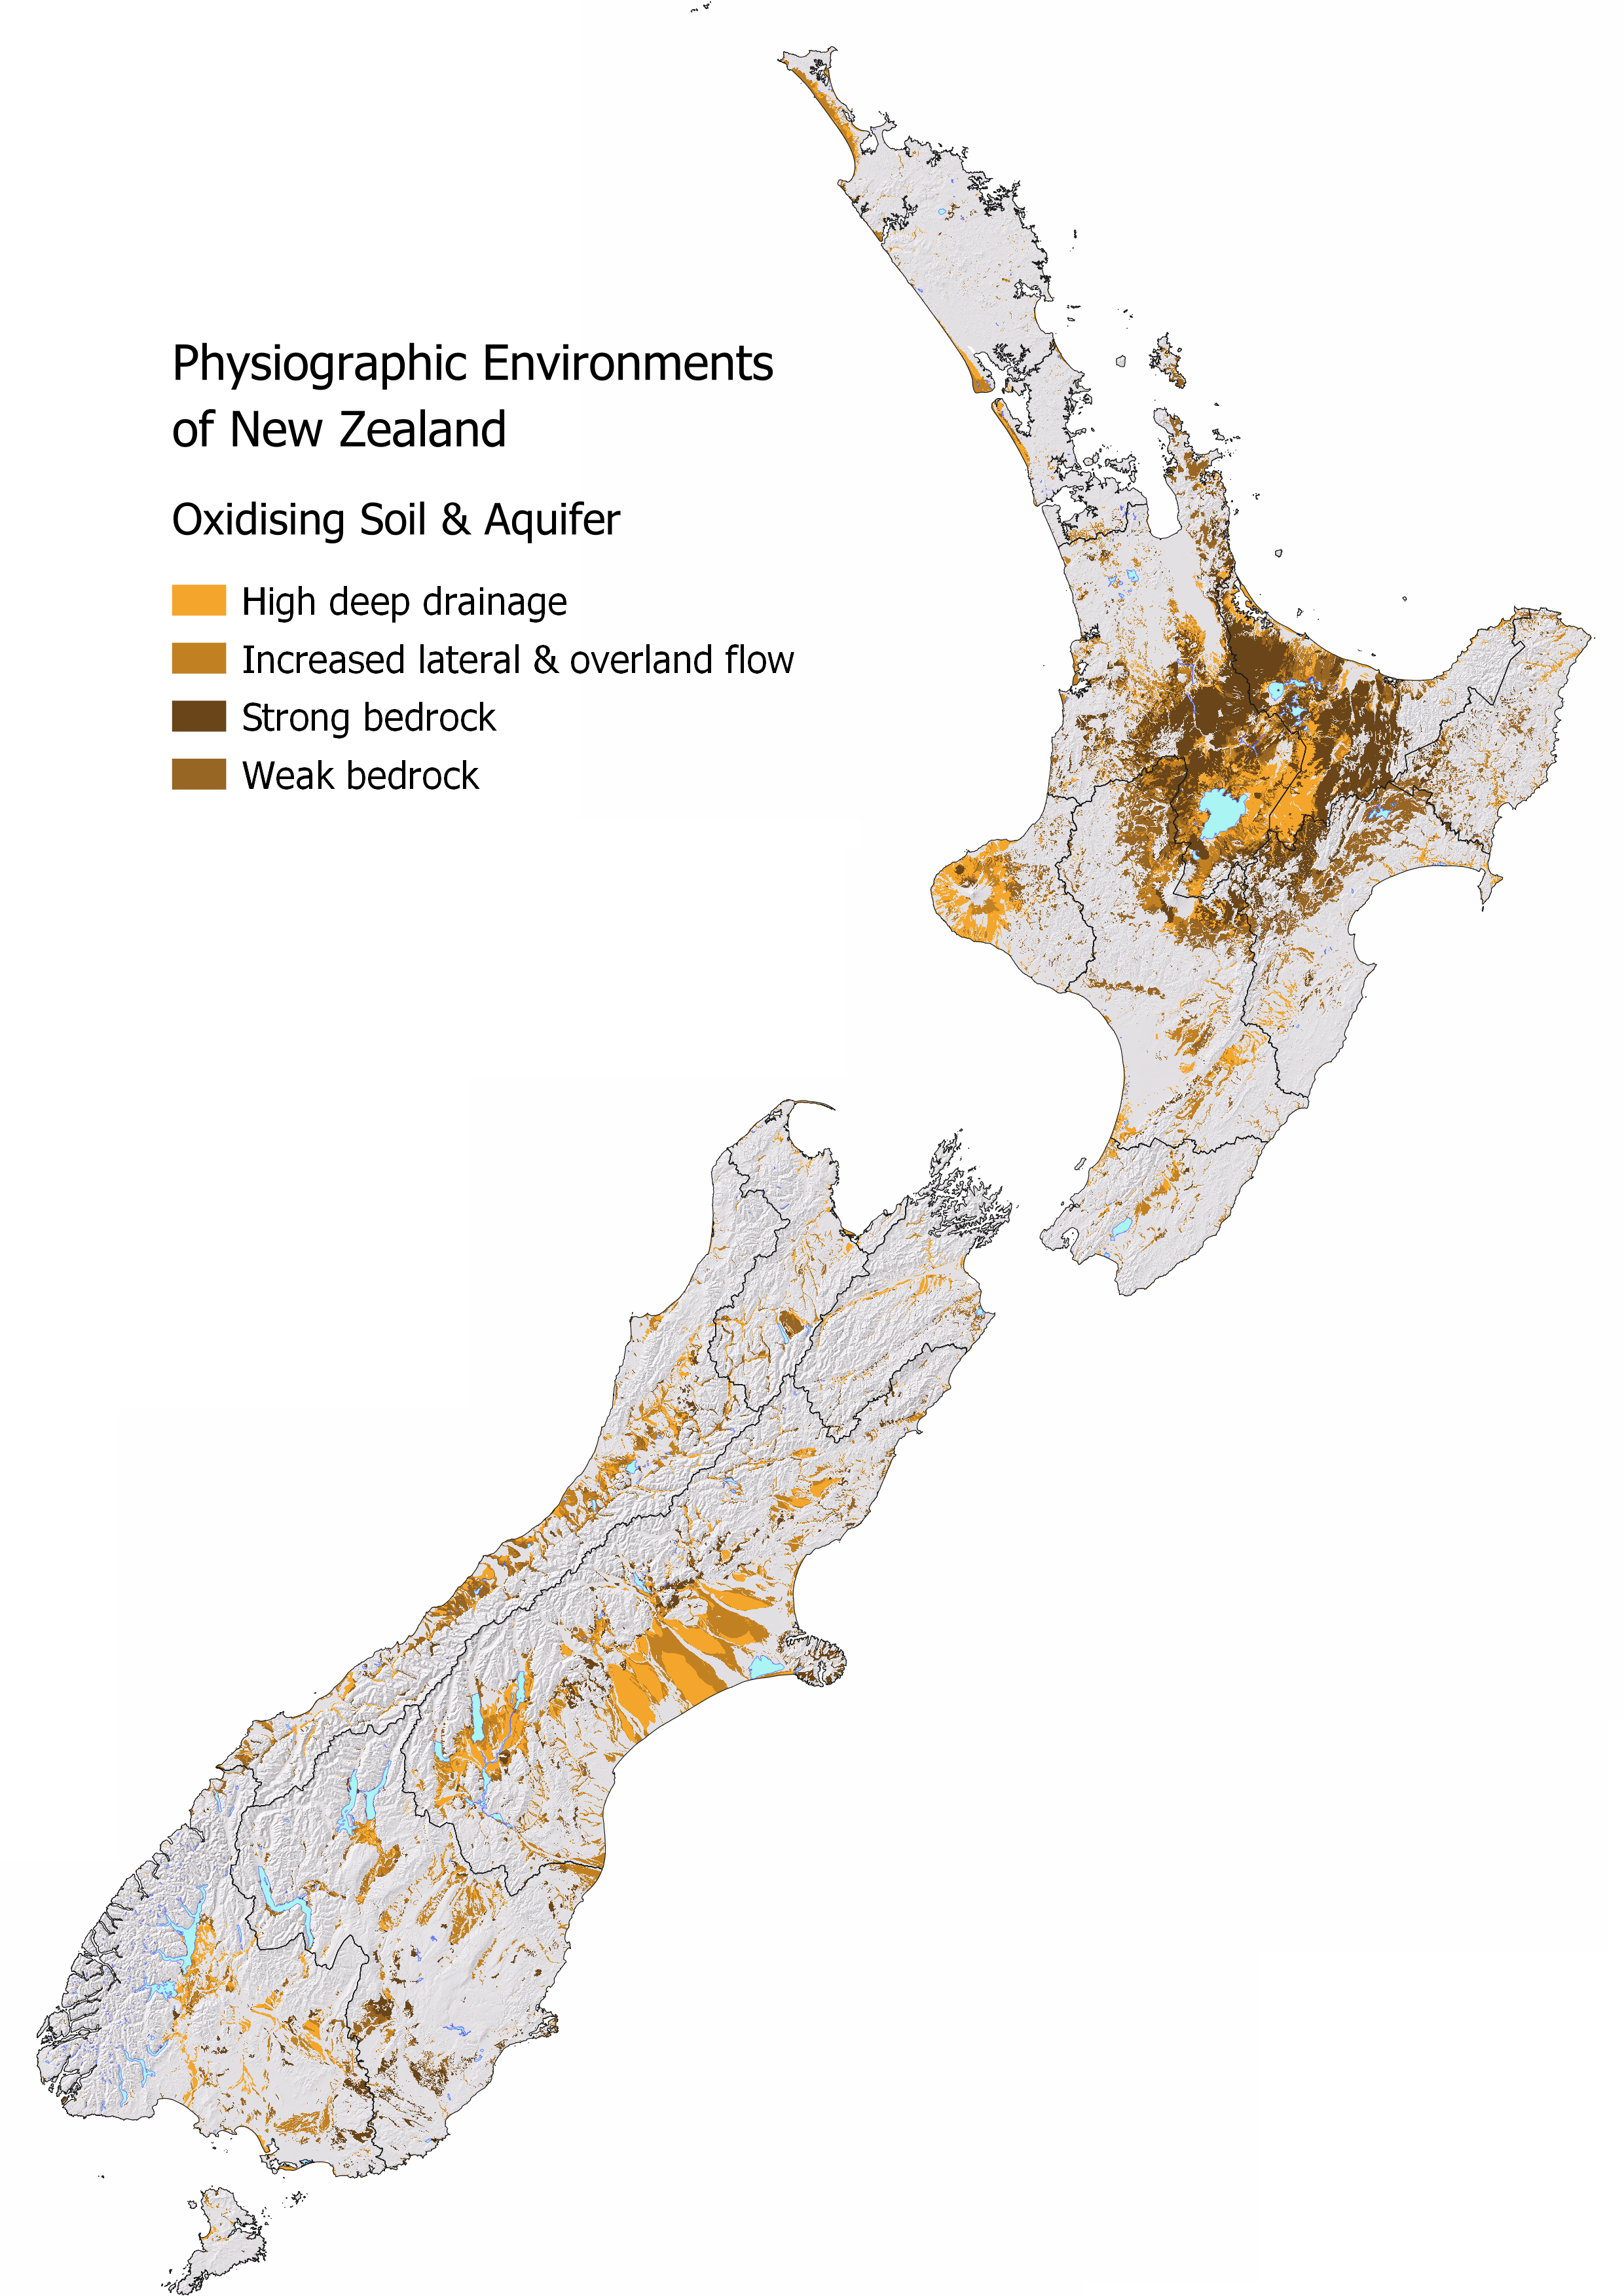 slope map of new zealand with the parts classified as 'Oxidising Soil and Aquifer' showing.